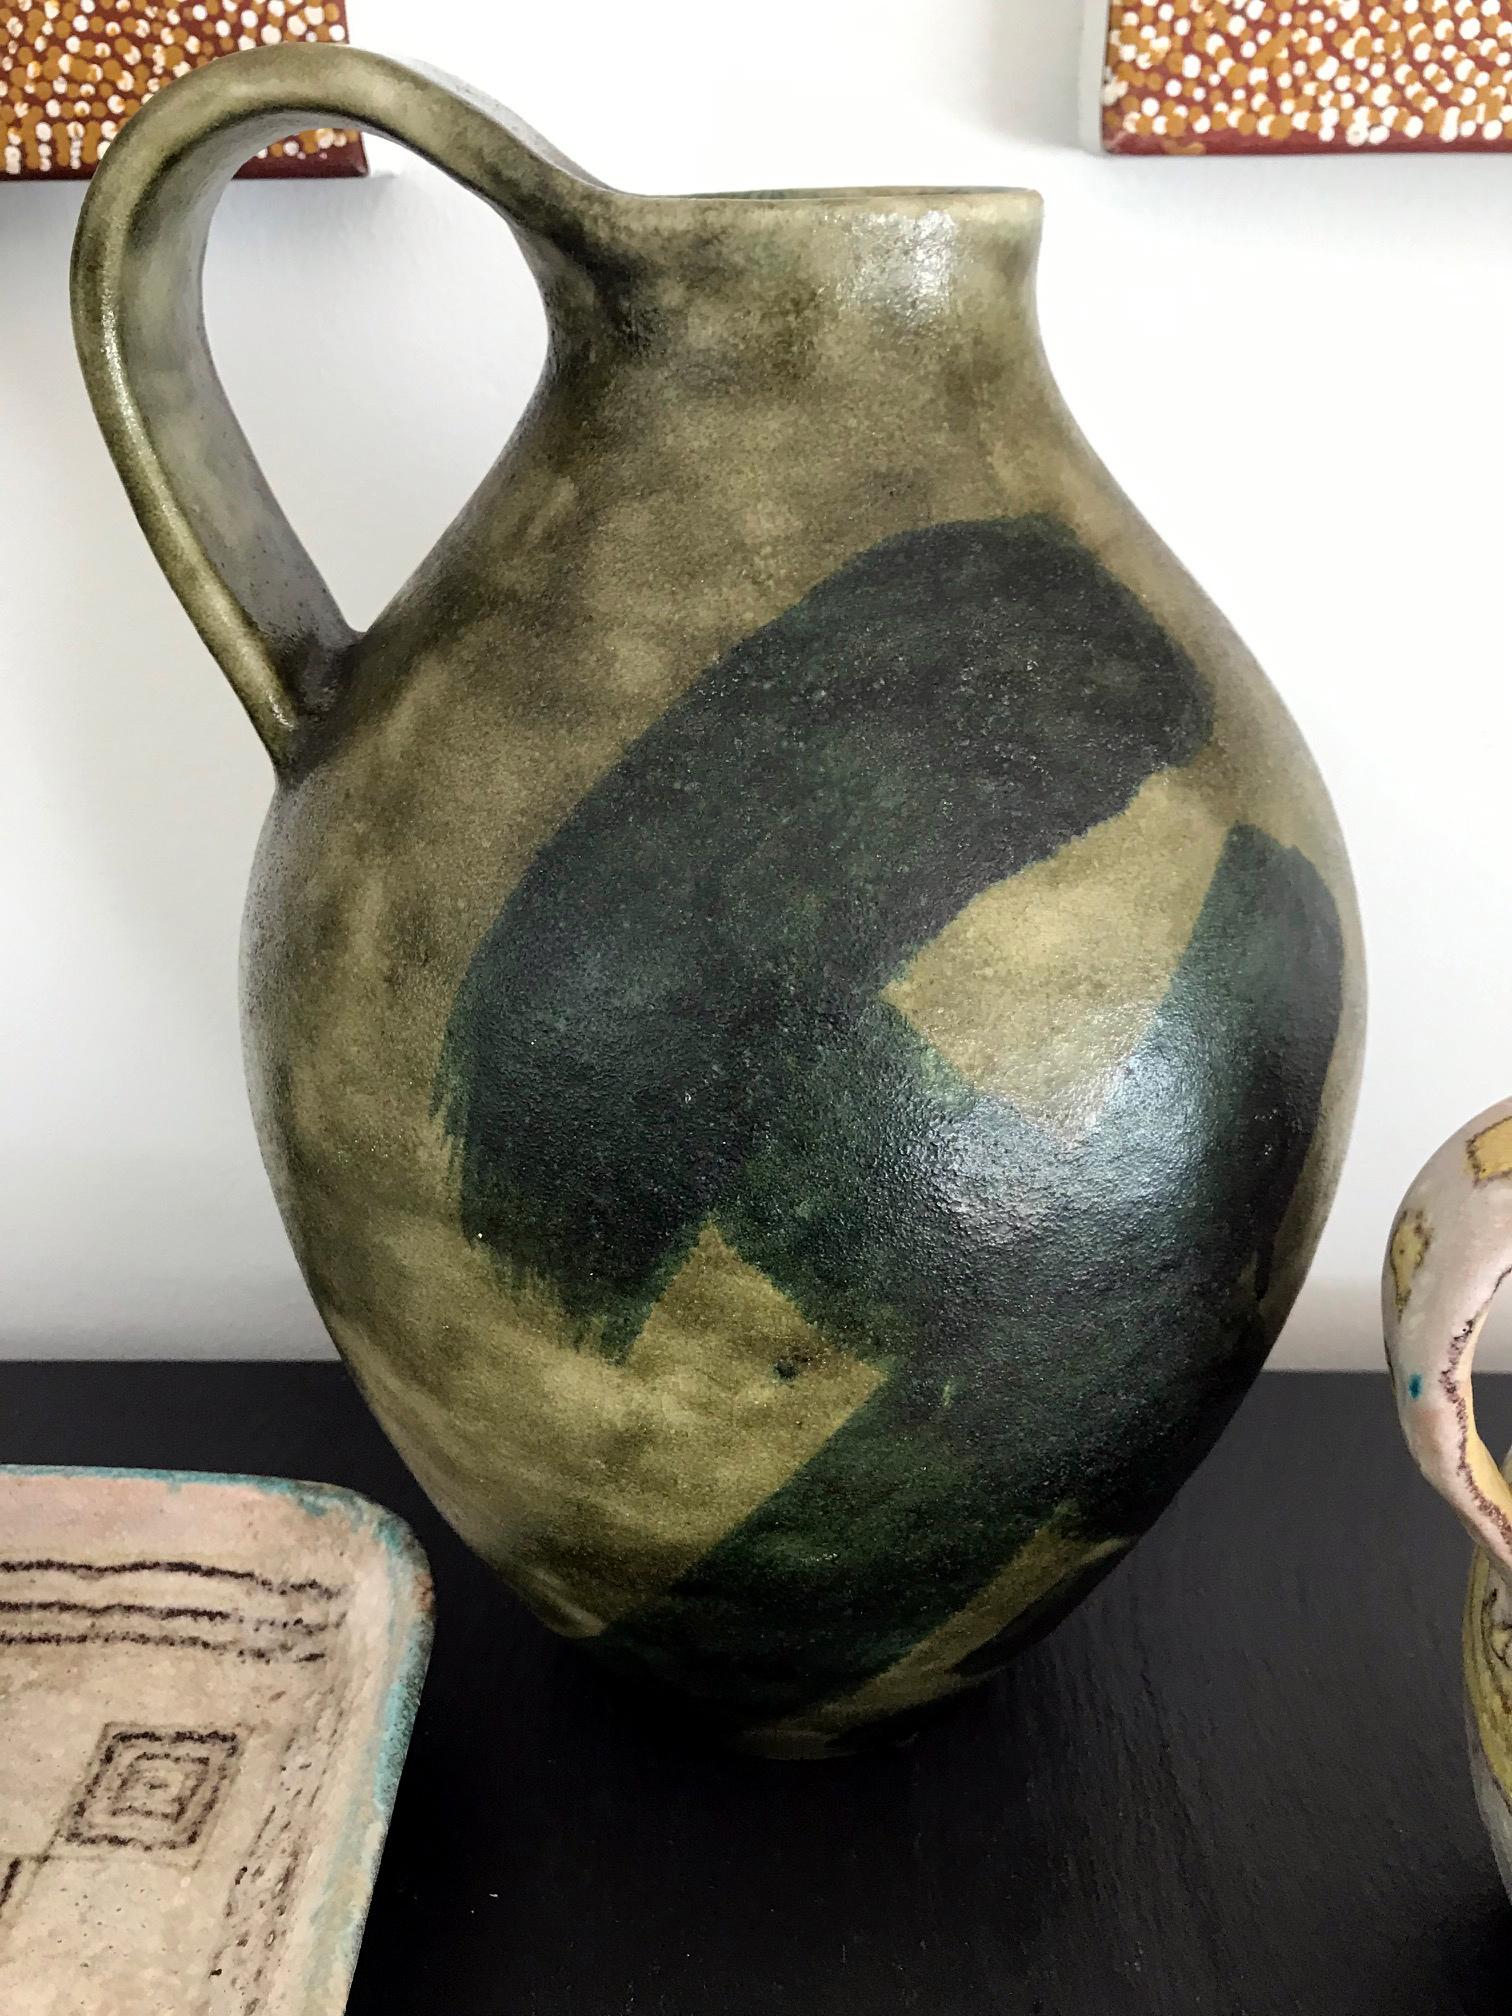 An impressive and large stoneware pitcher by Guido Gambone, Italy, circa 1960s. In a mottled green glaze with darker strokes. The abstract geometrical decoration contrasts the Classic organic form. A bespoken and timeless piece from Guido Gambone.